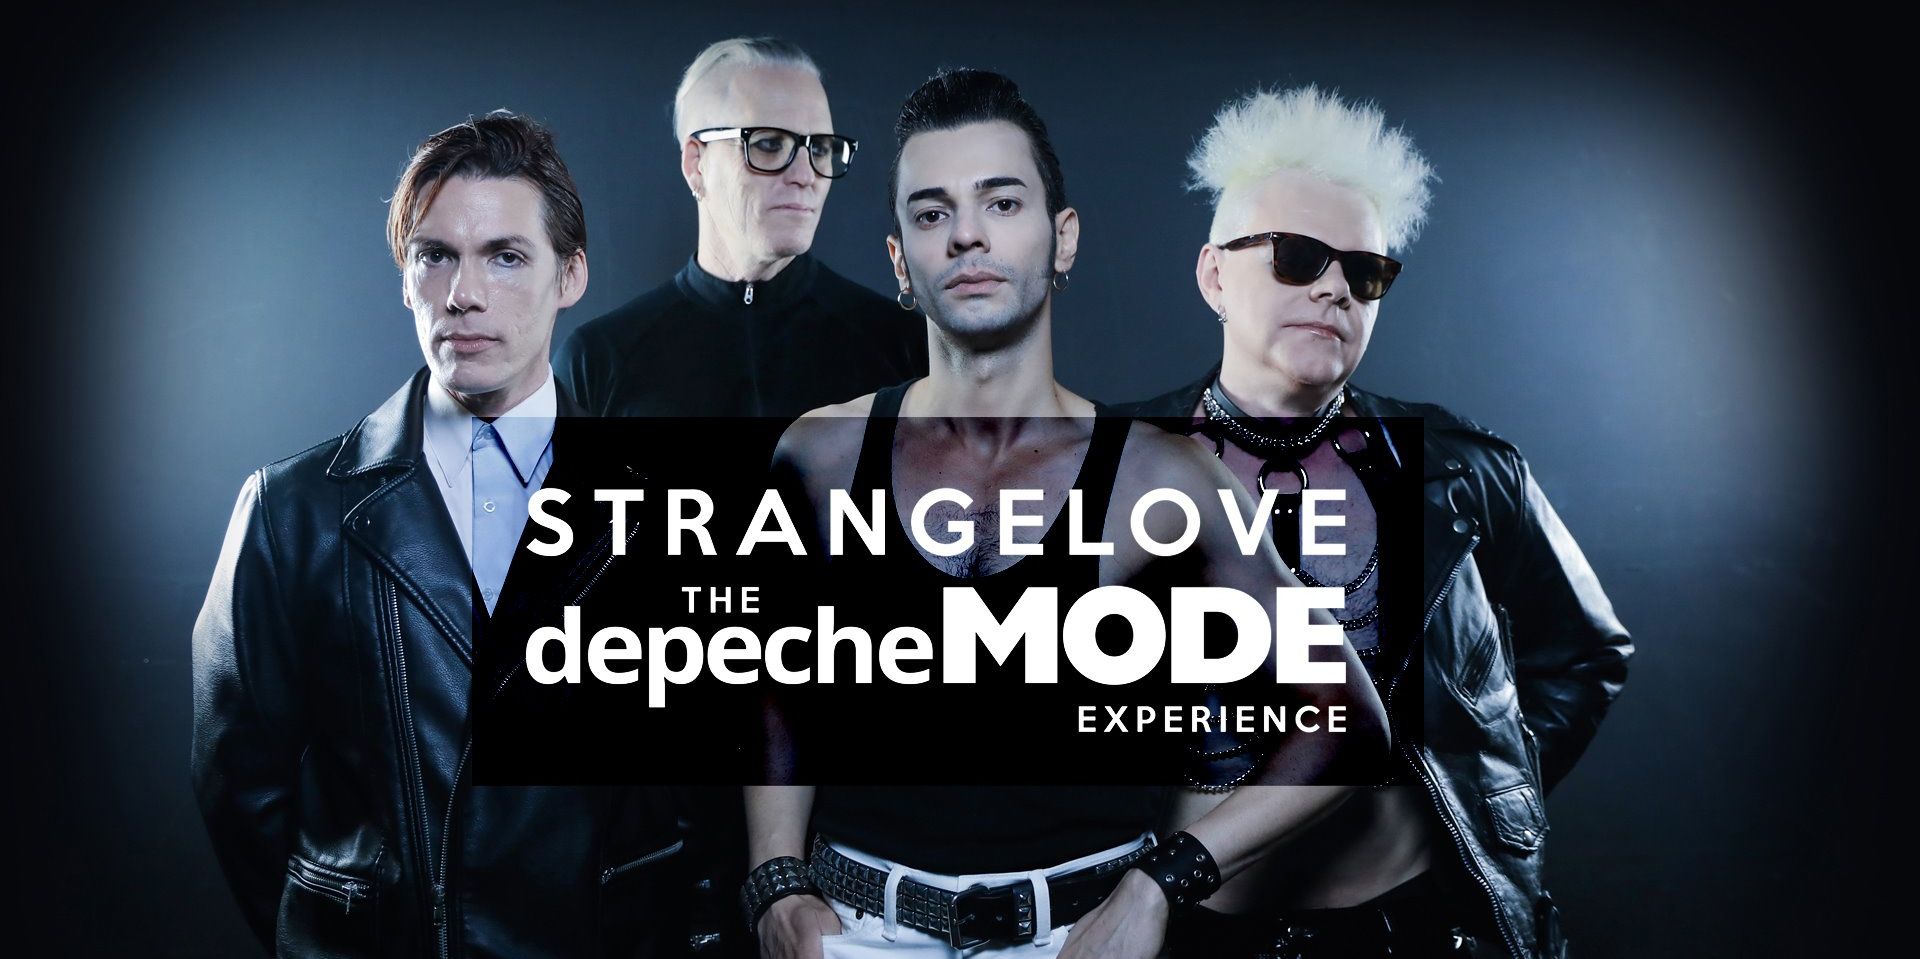 Strangelove (The Depeche Mode Experience) promotional image